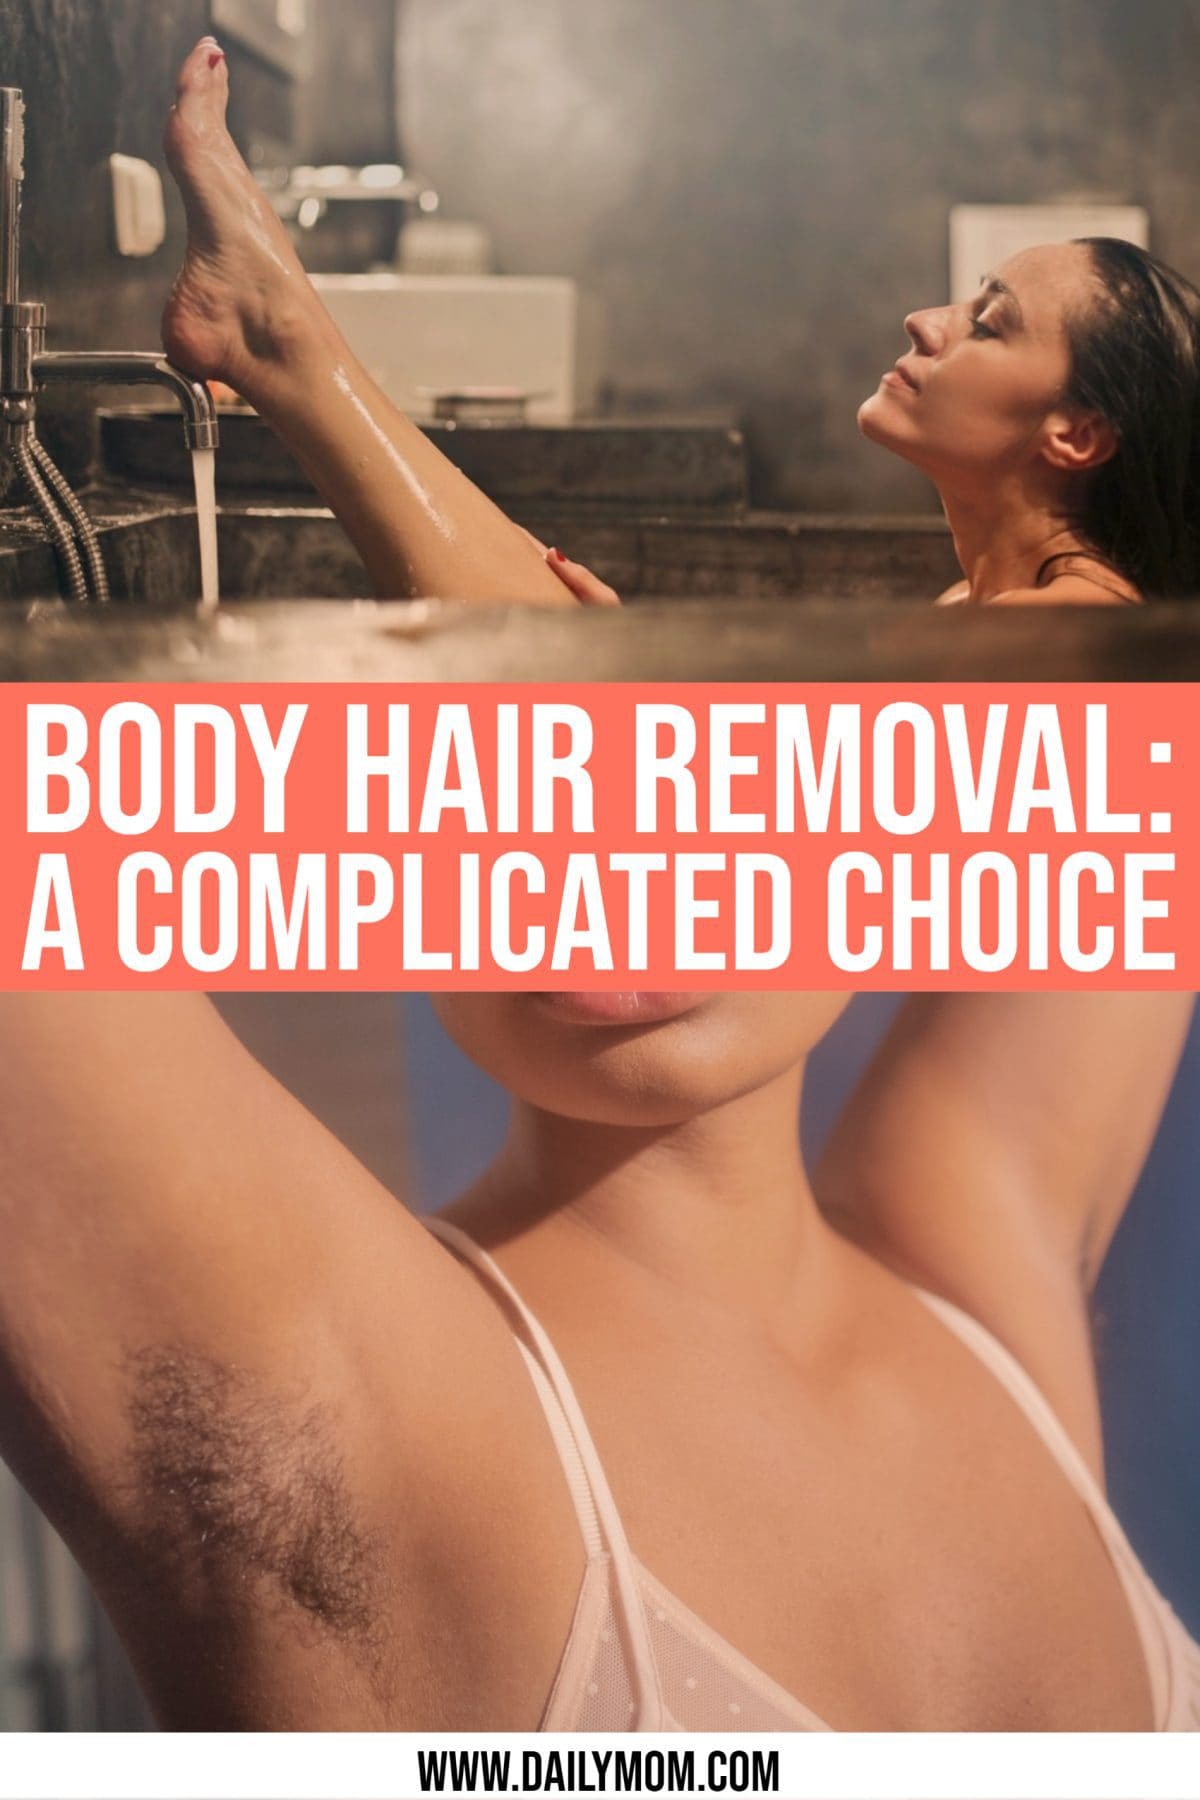 The Complicated Choice Of Body Hair Removal